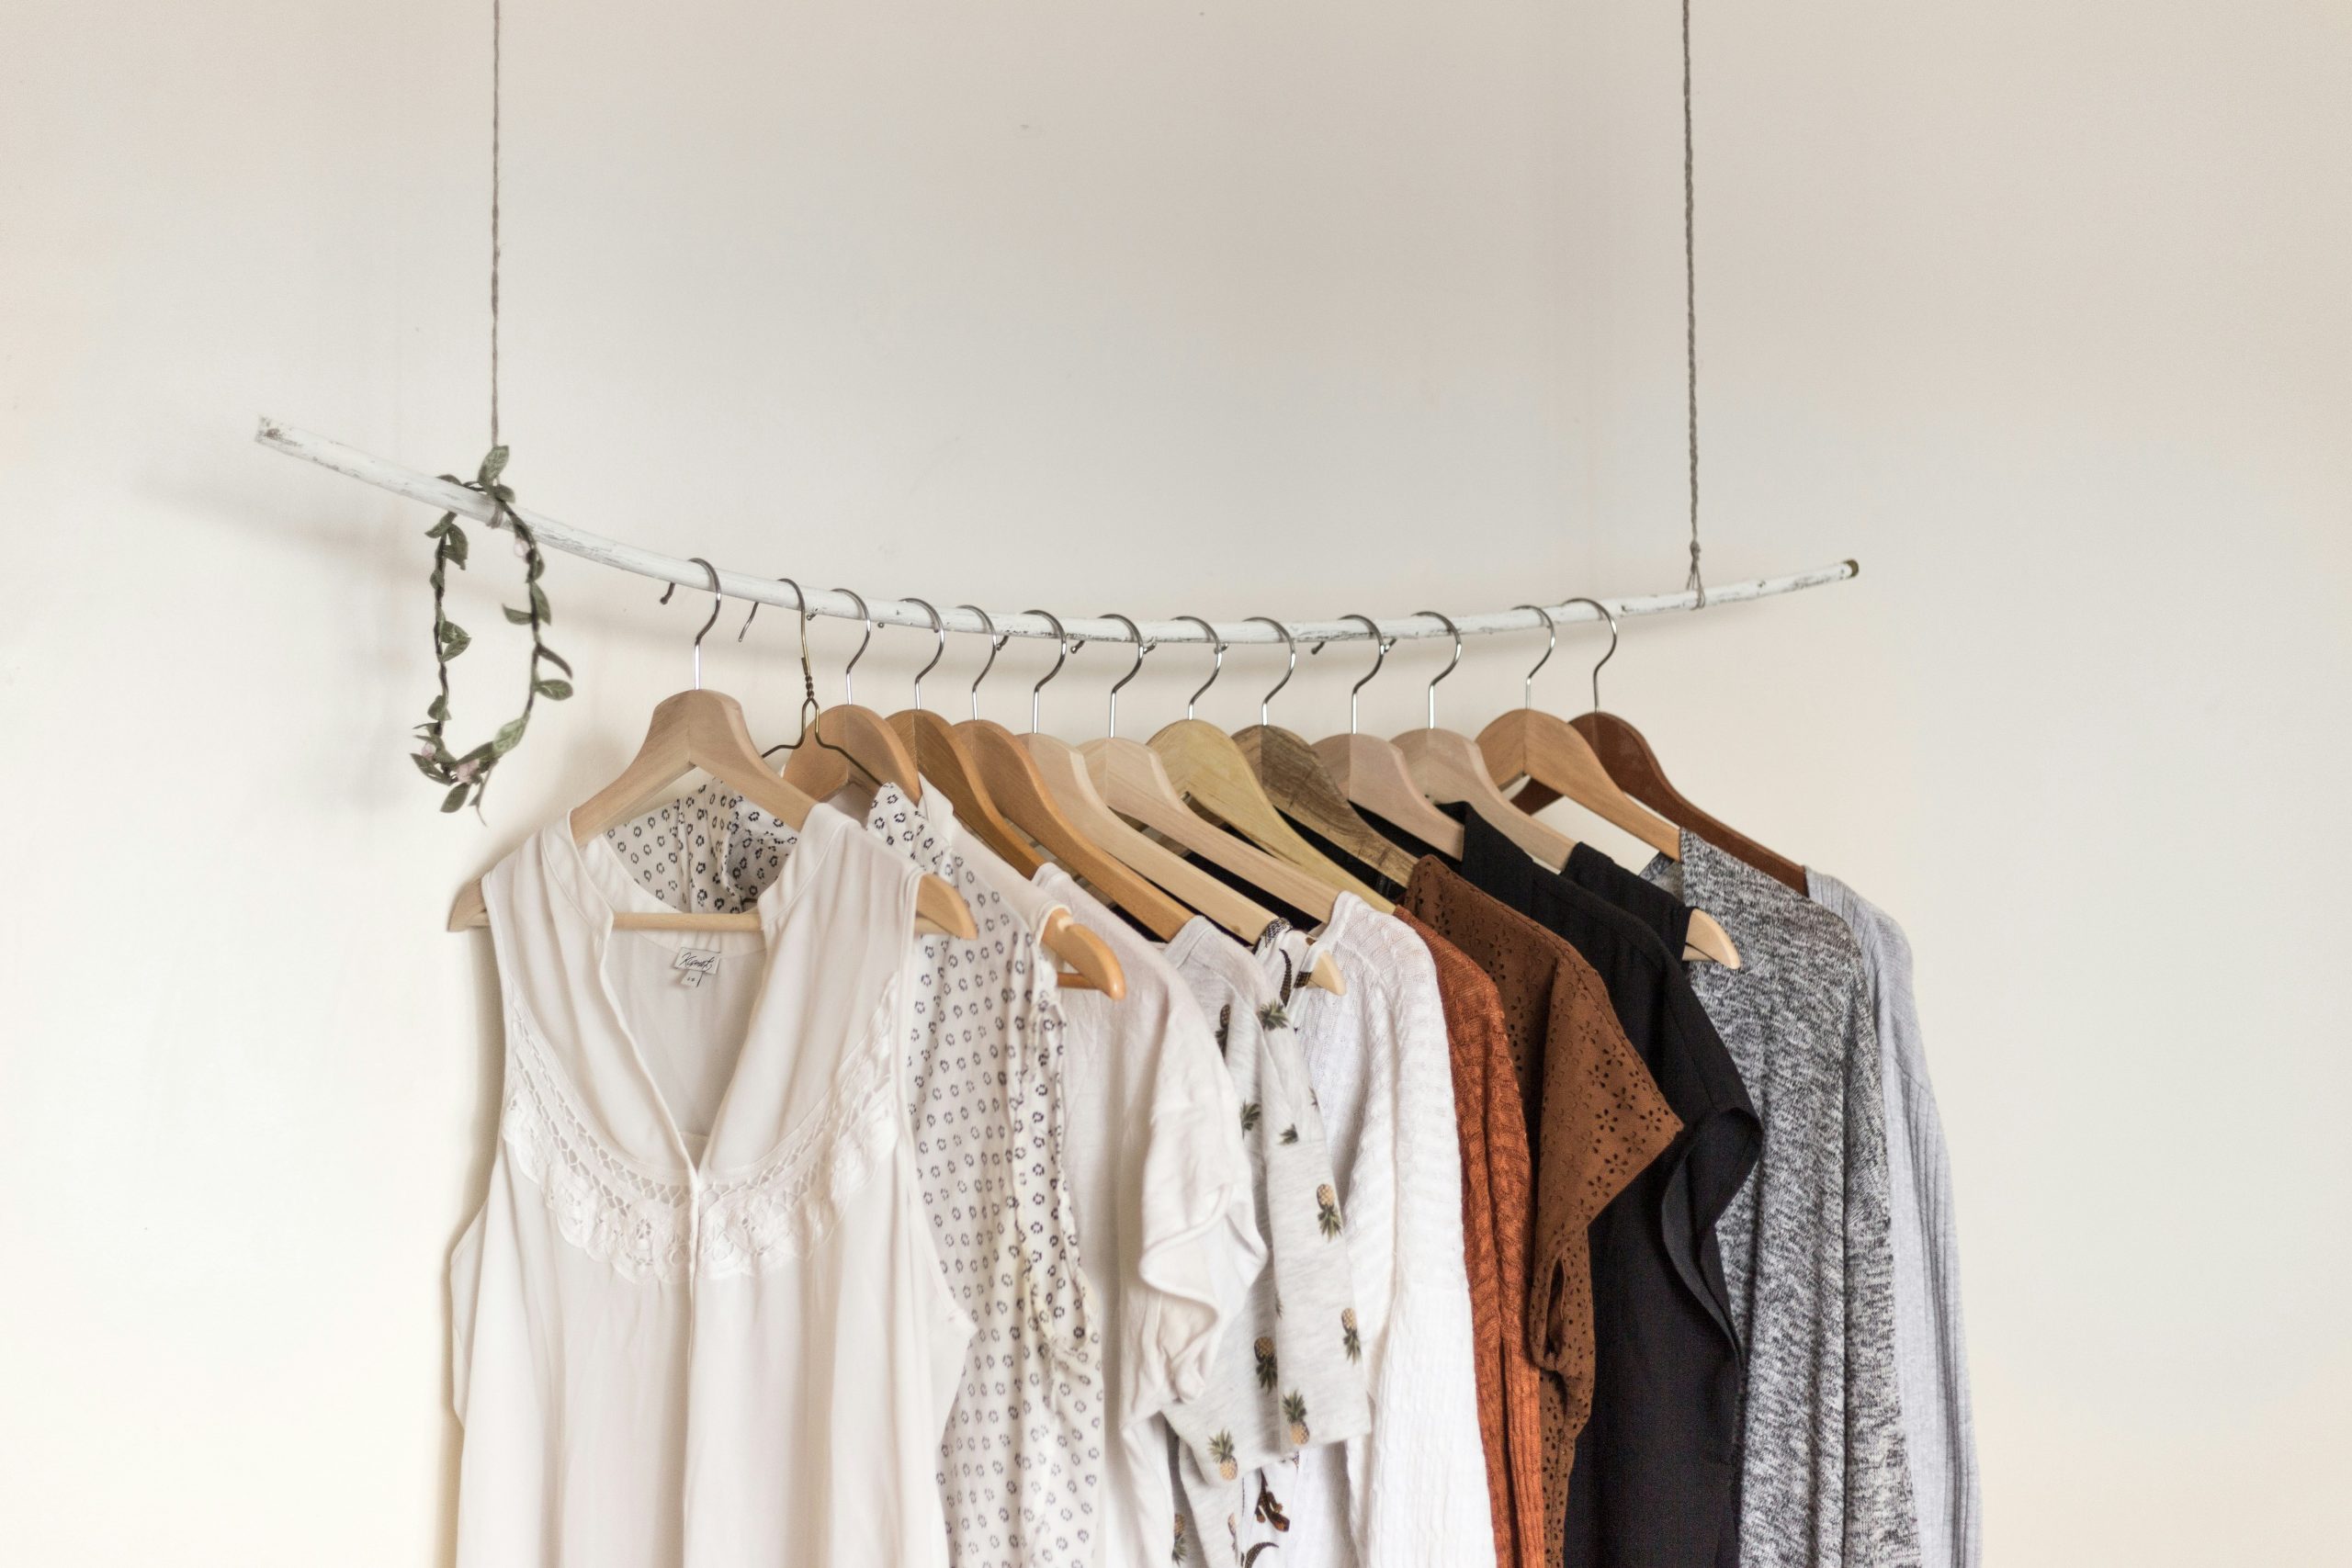 explore the latest wardrobe designs for your home and find inspiration for modern, traditional, and versatile storage solutions.